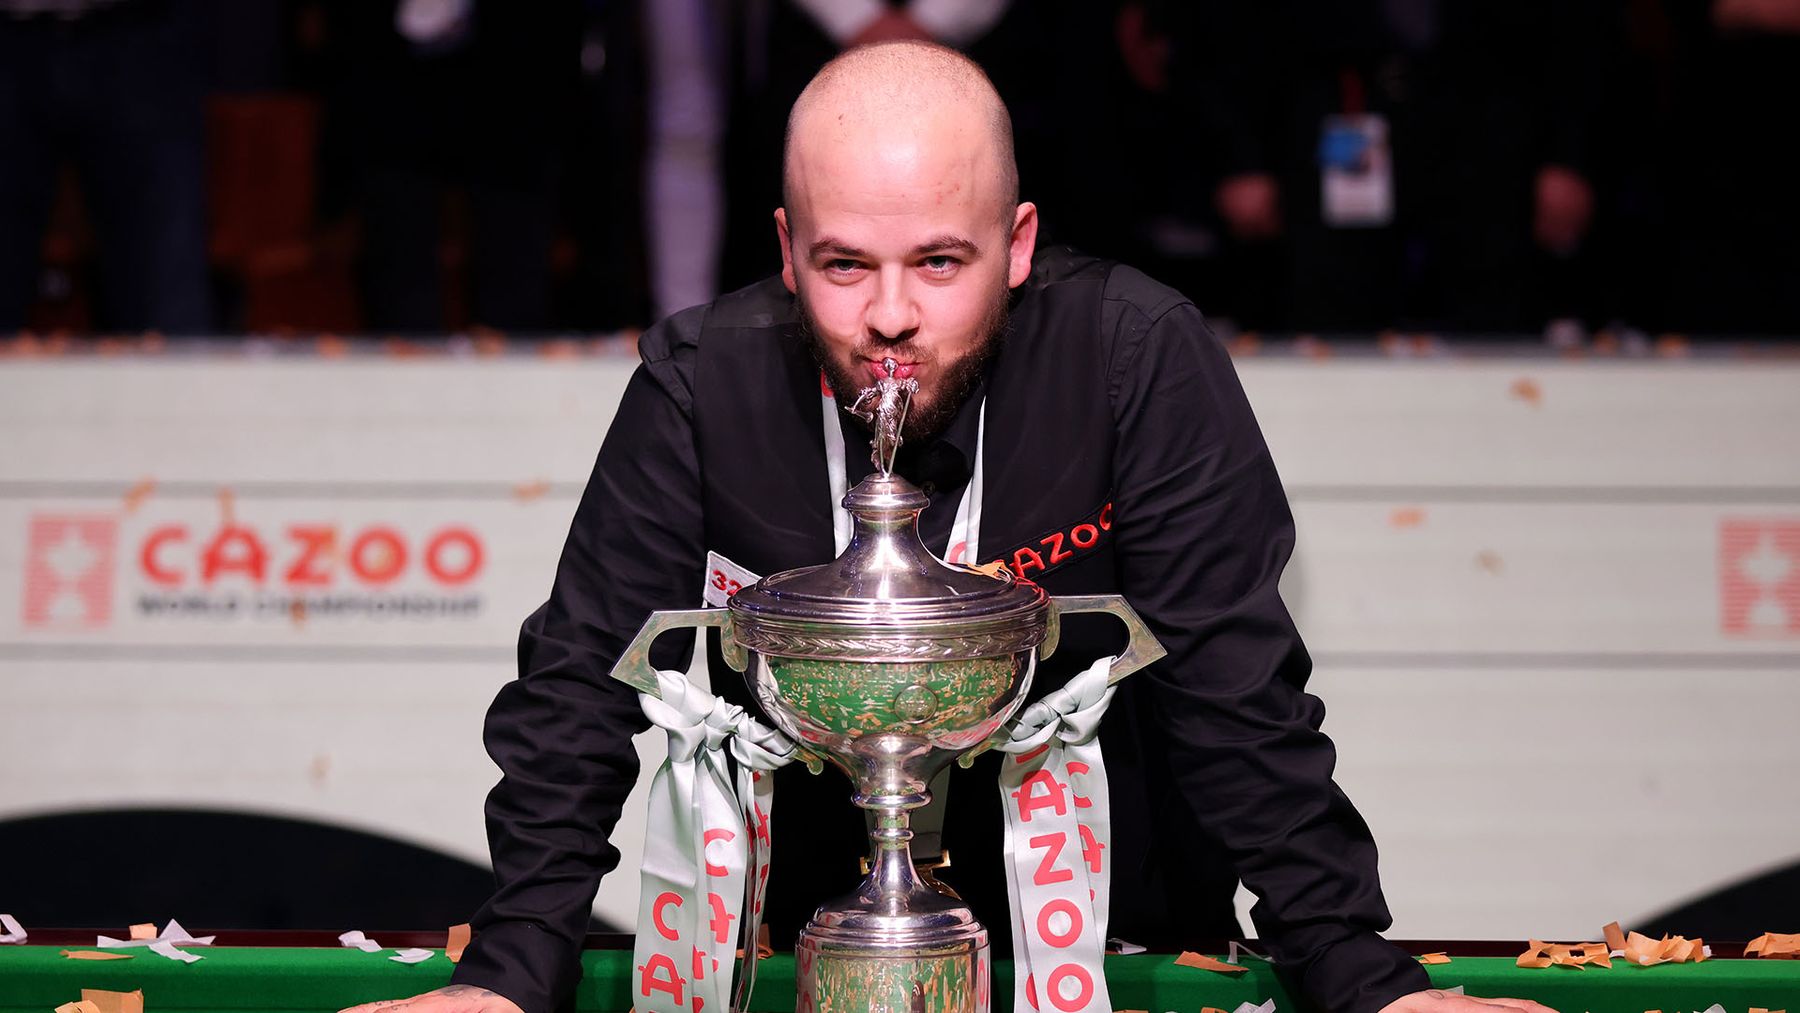 2023 World Snooker Championship draw, seeds, schedule, results and TV information